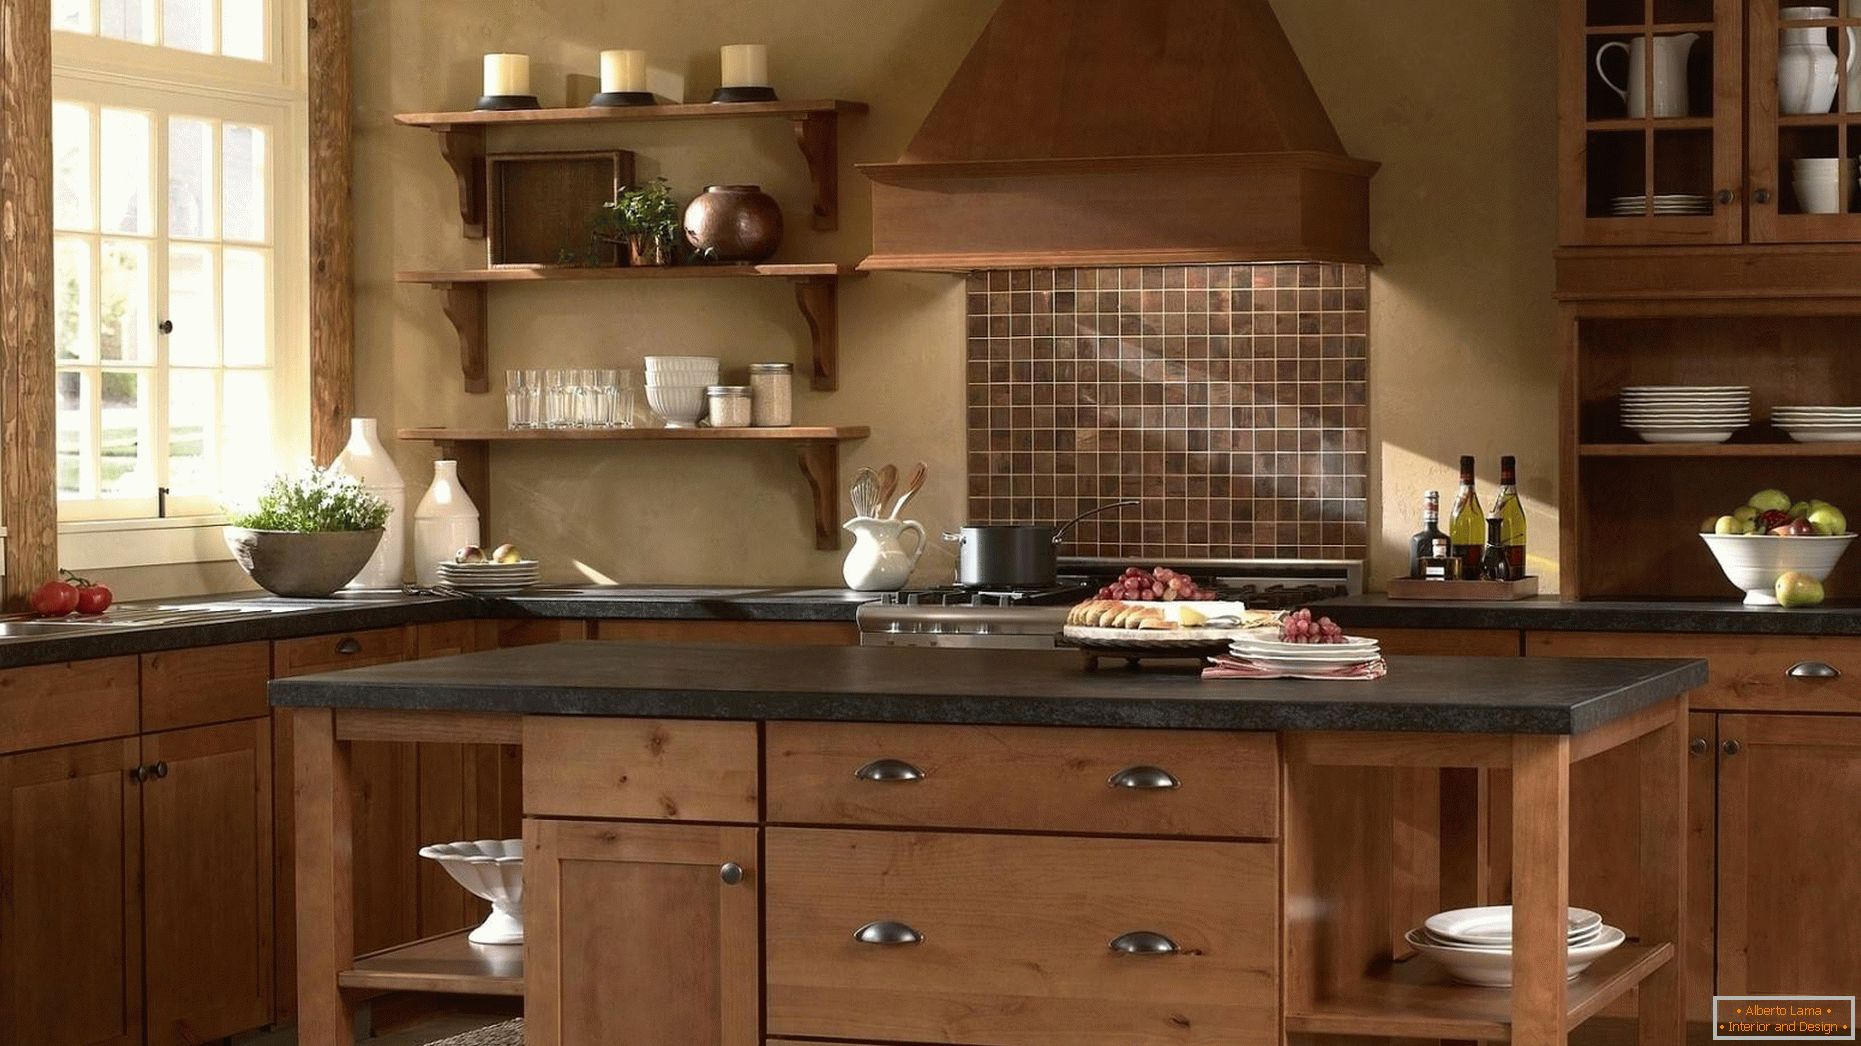 Kitchens made of wood are classic!